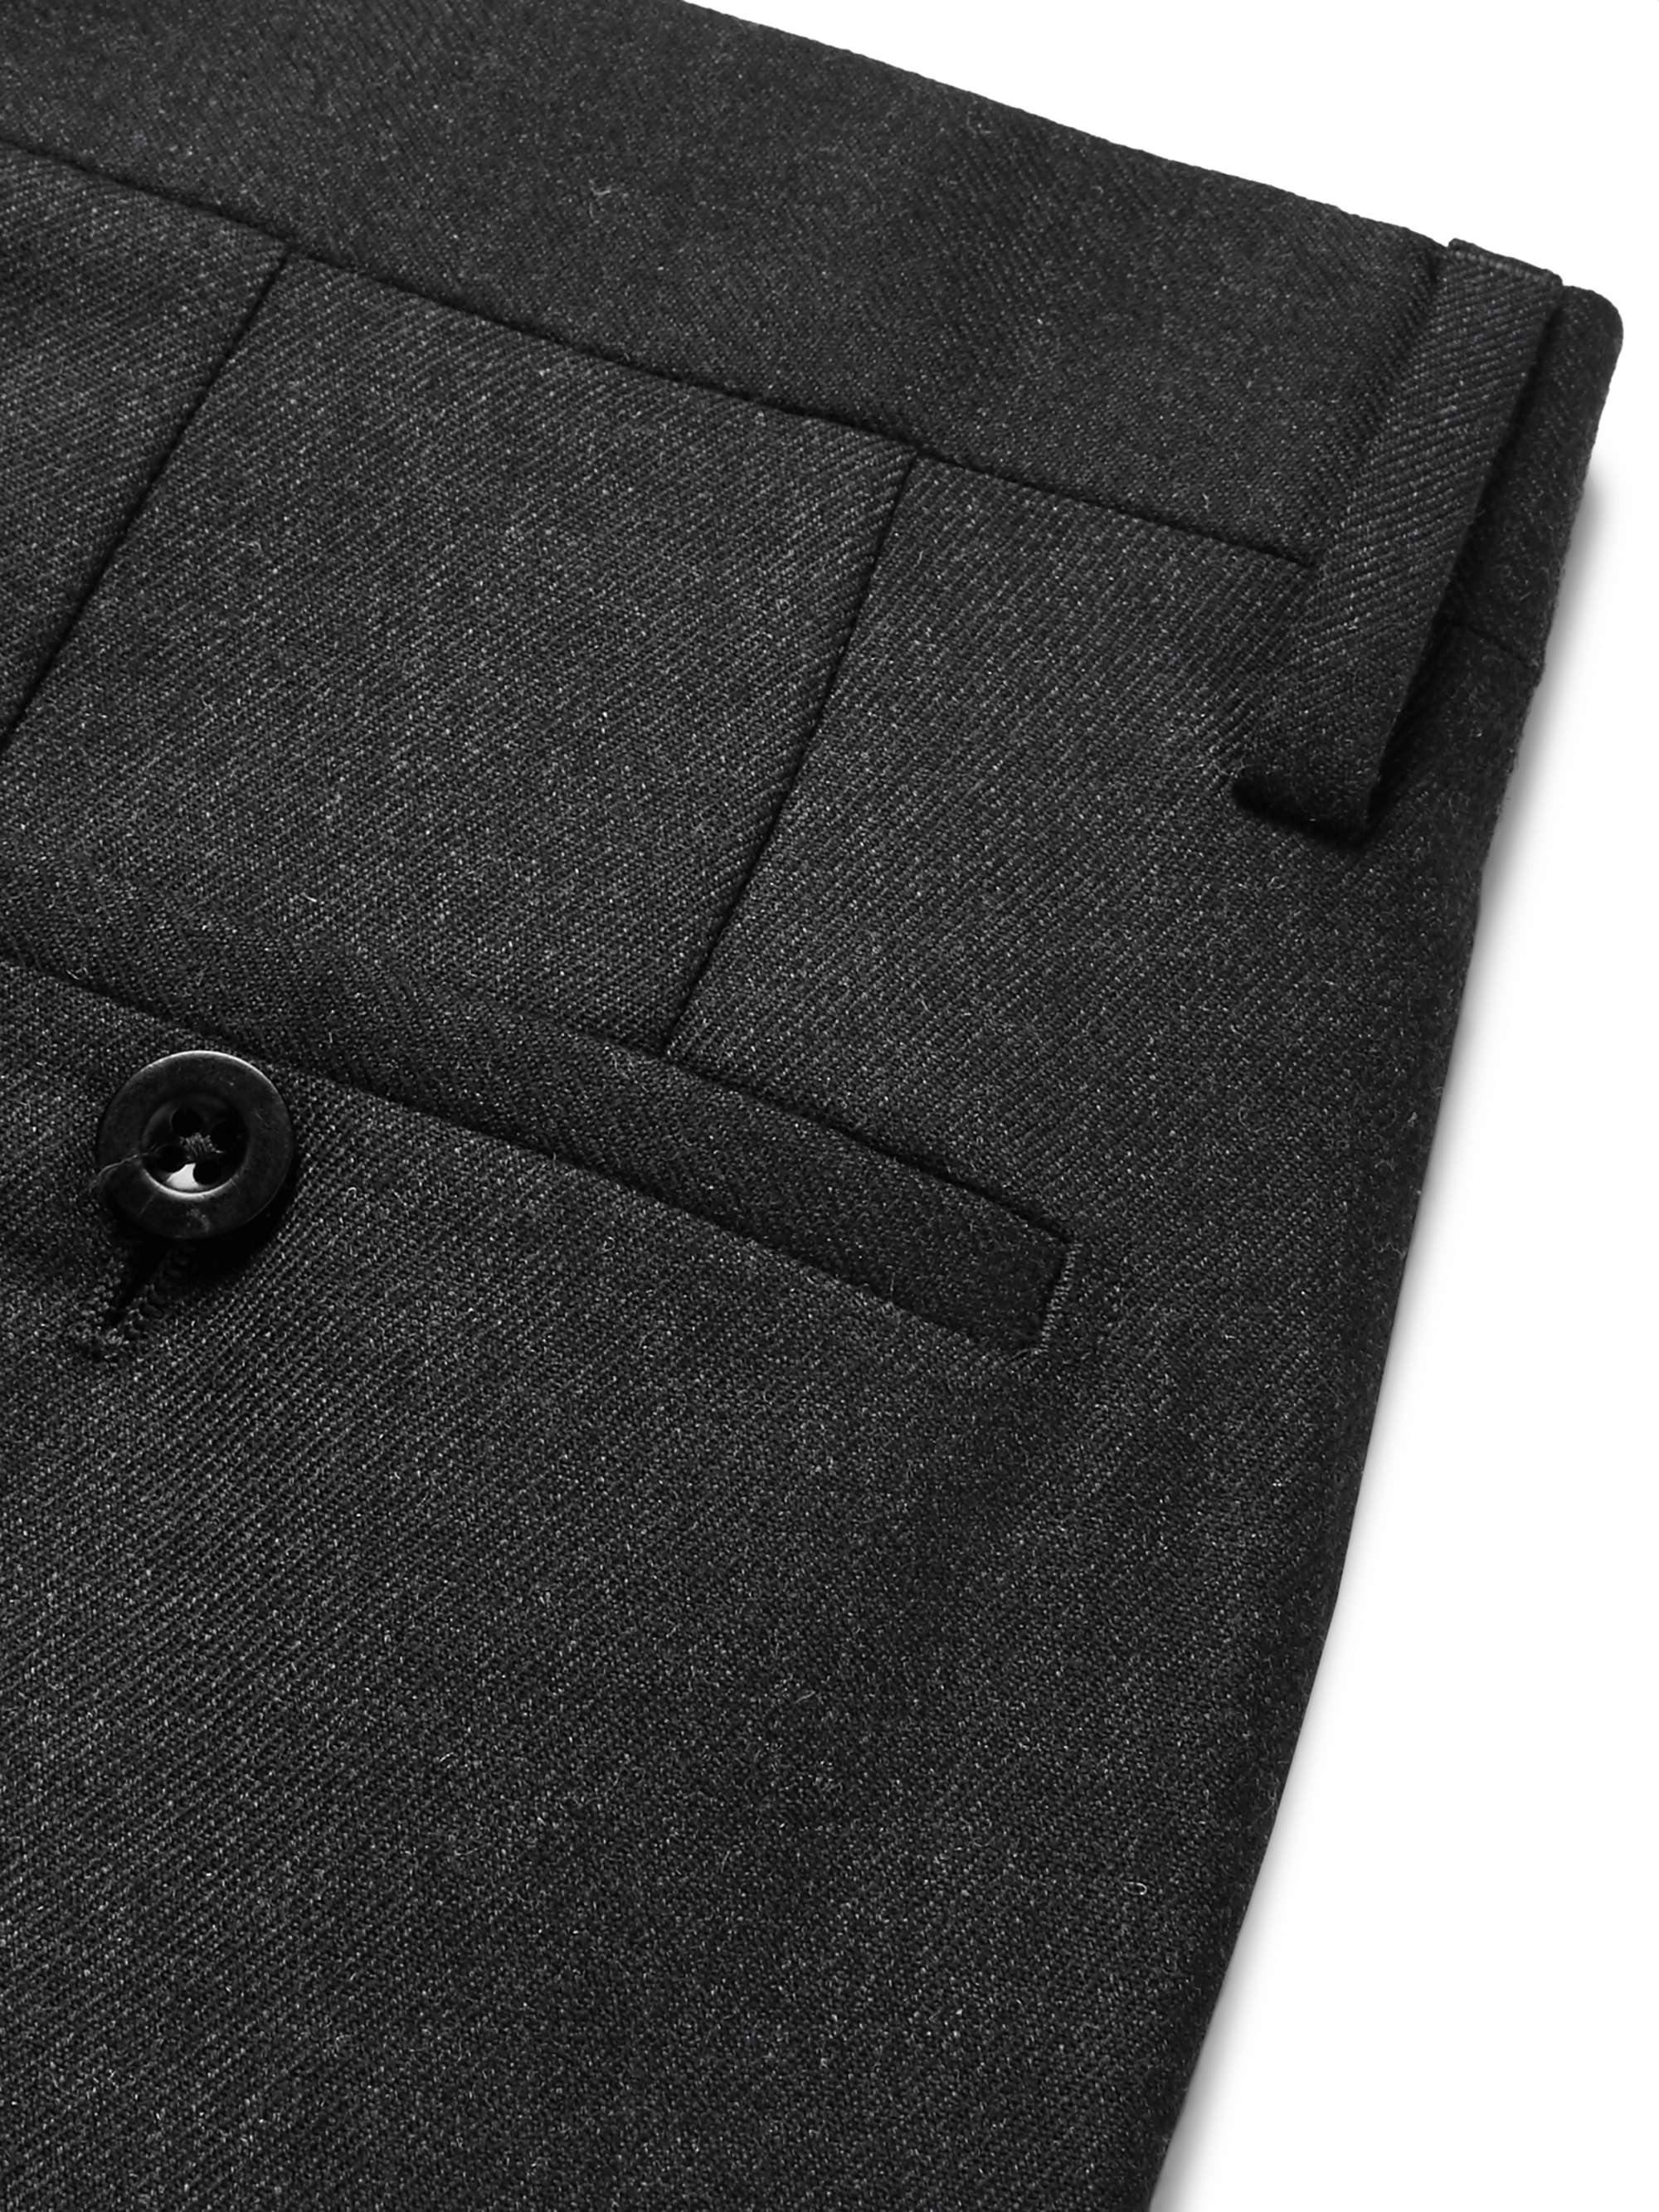 MR P. Slim-Fit Navy Worsted Wool Trousers